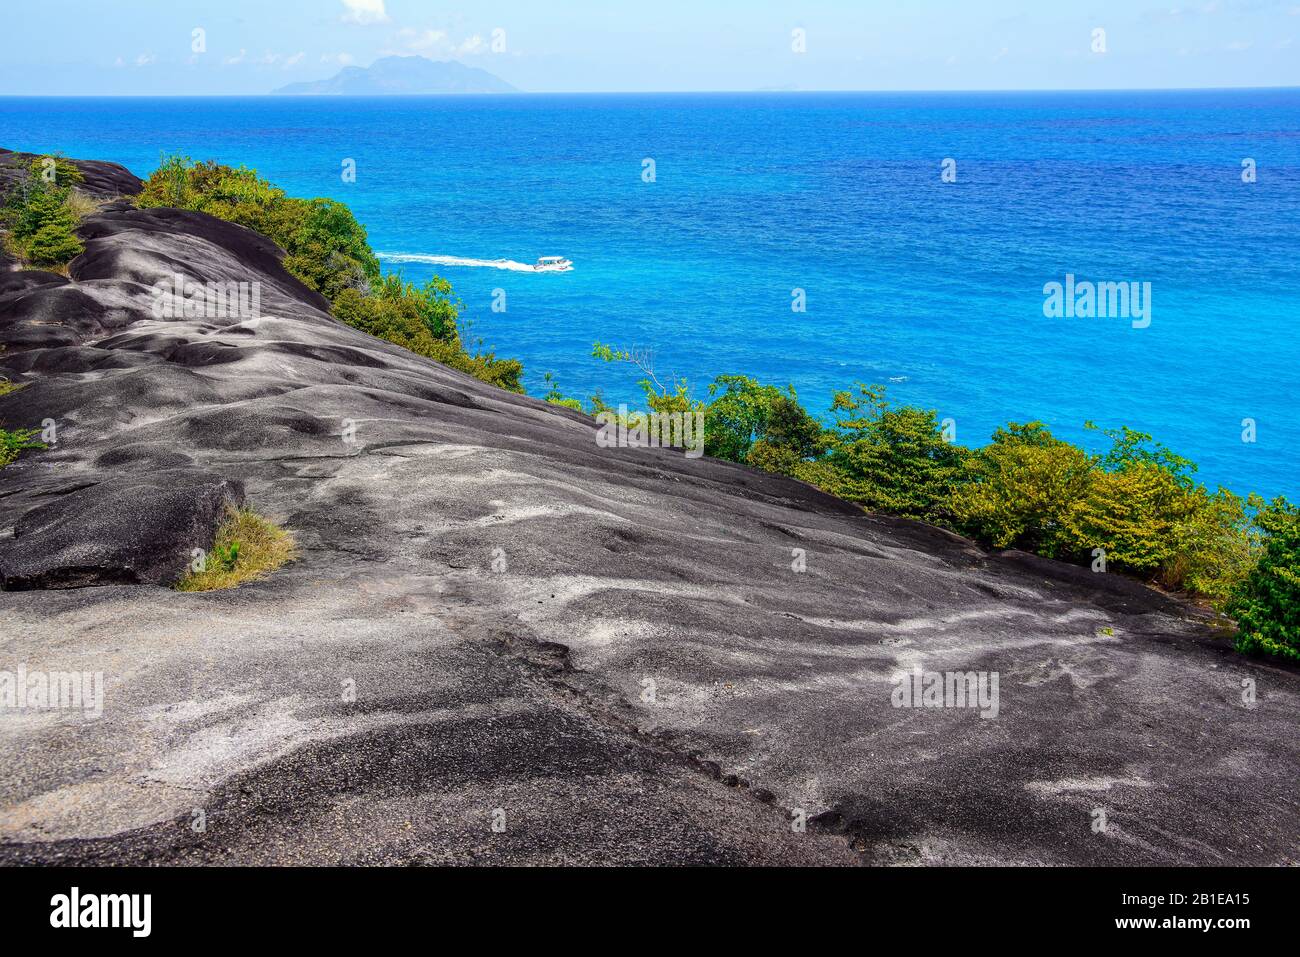 View of Indian Ocean from North point of Mahe island, Seychelles. Stock Photo